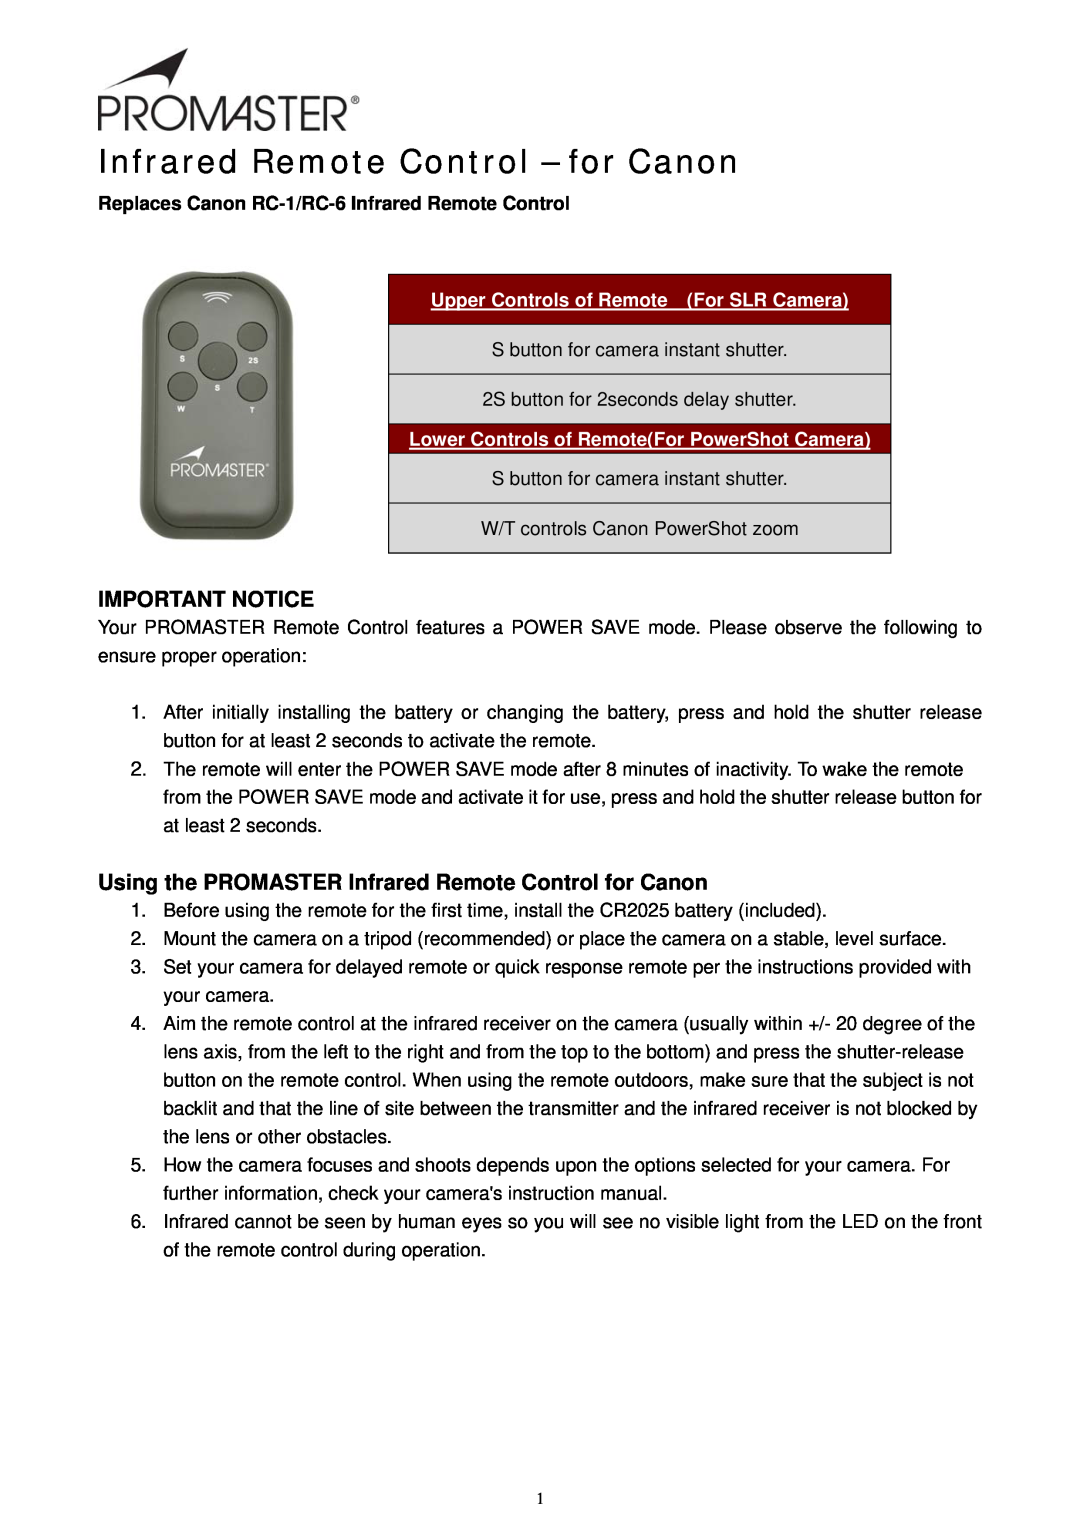 ProMaster Mic1 instruction manual Important Notice, Using the PROMASTER Infrared Remote Control for Canon 